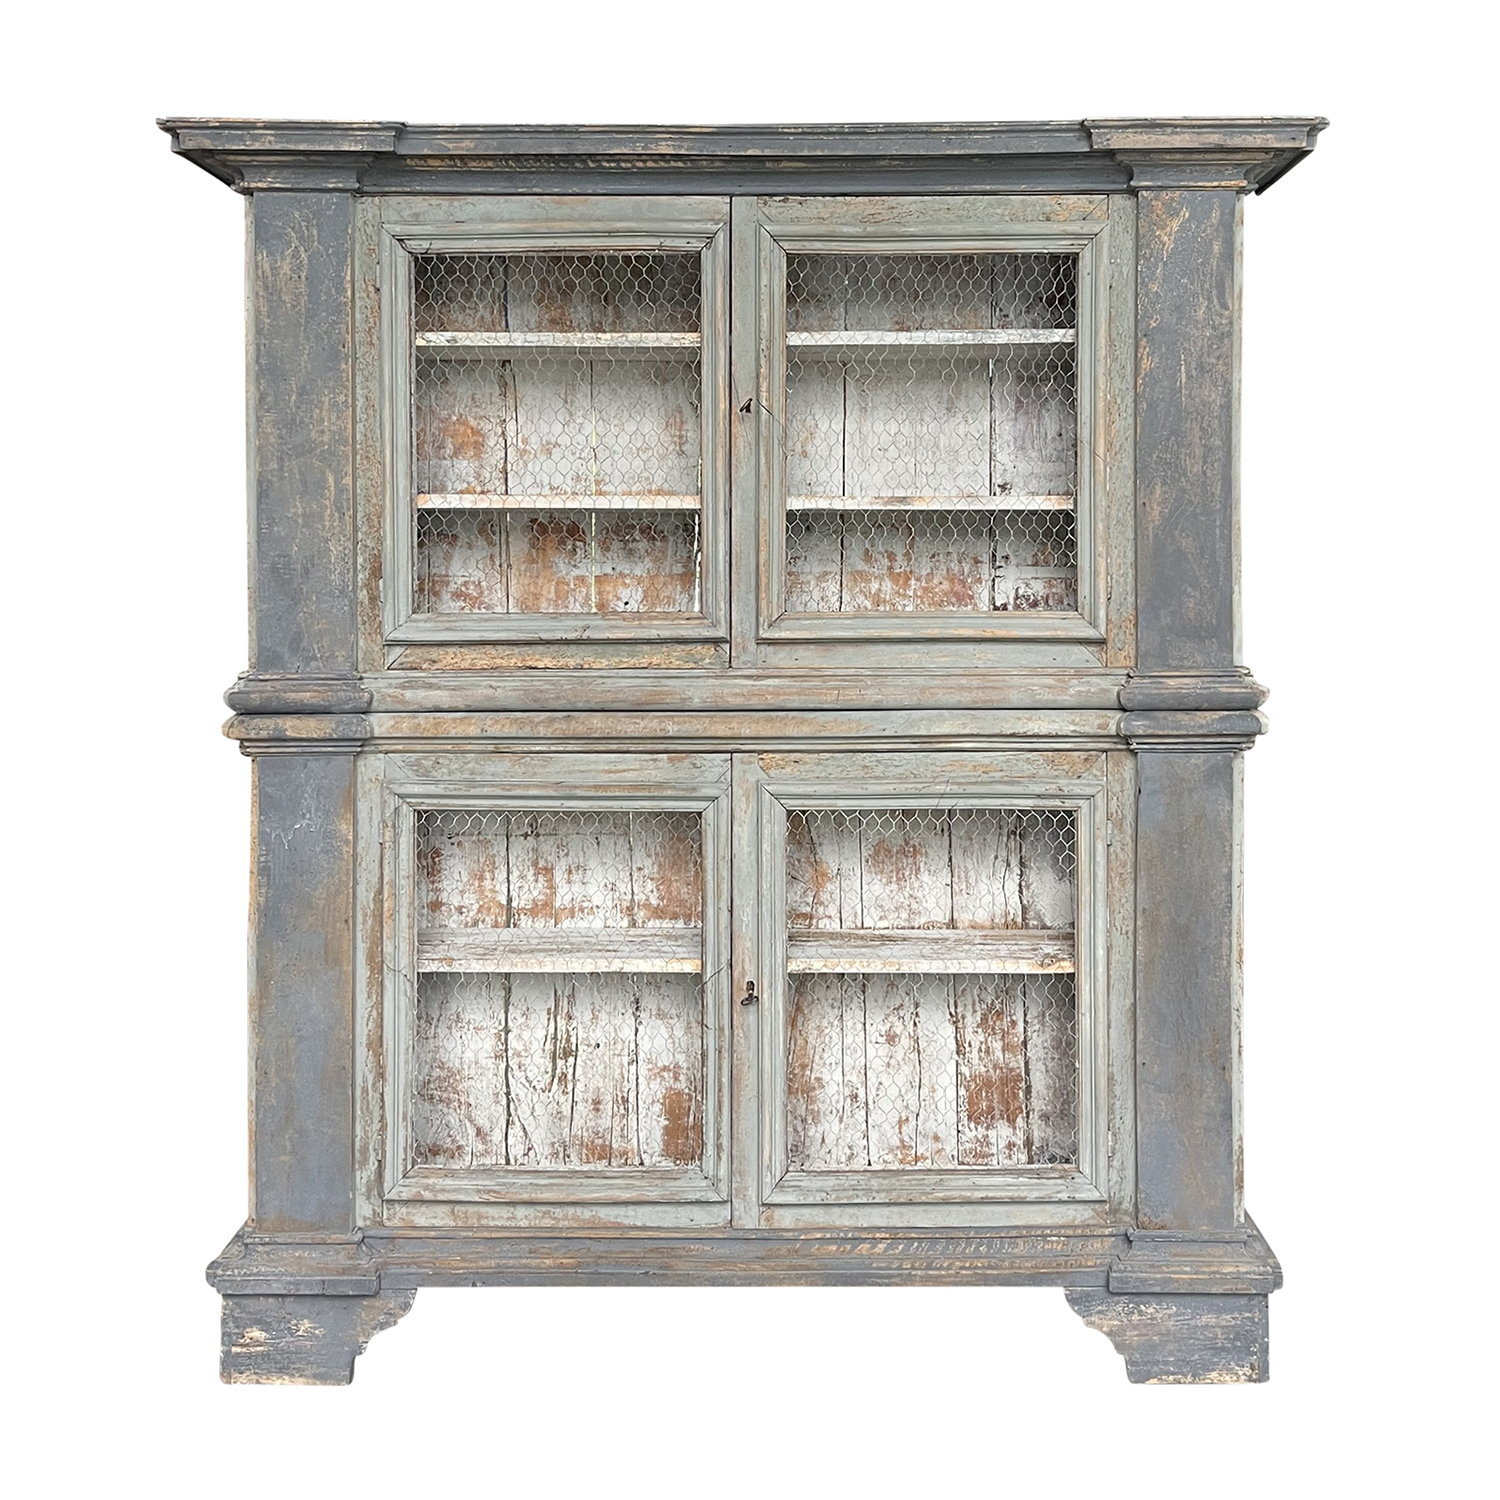 19th Century French Provencal Pine Library Bookcase – Antique Buffet Cabinet